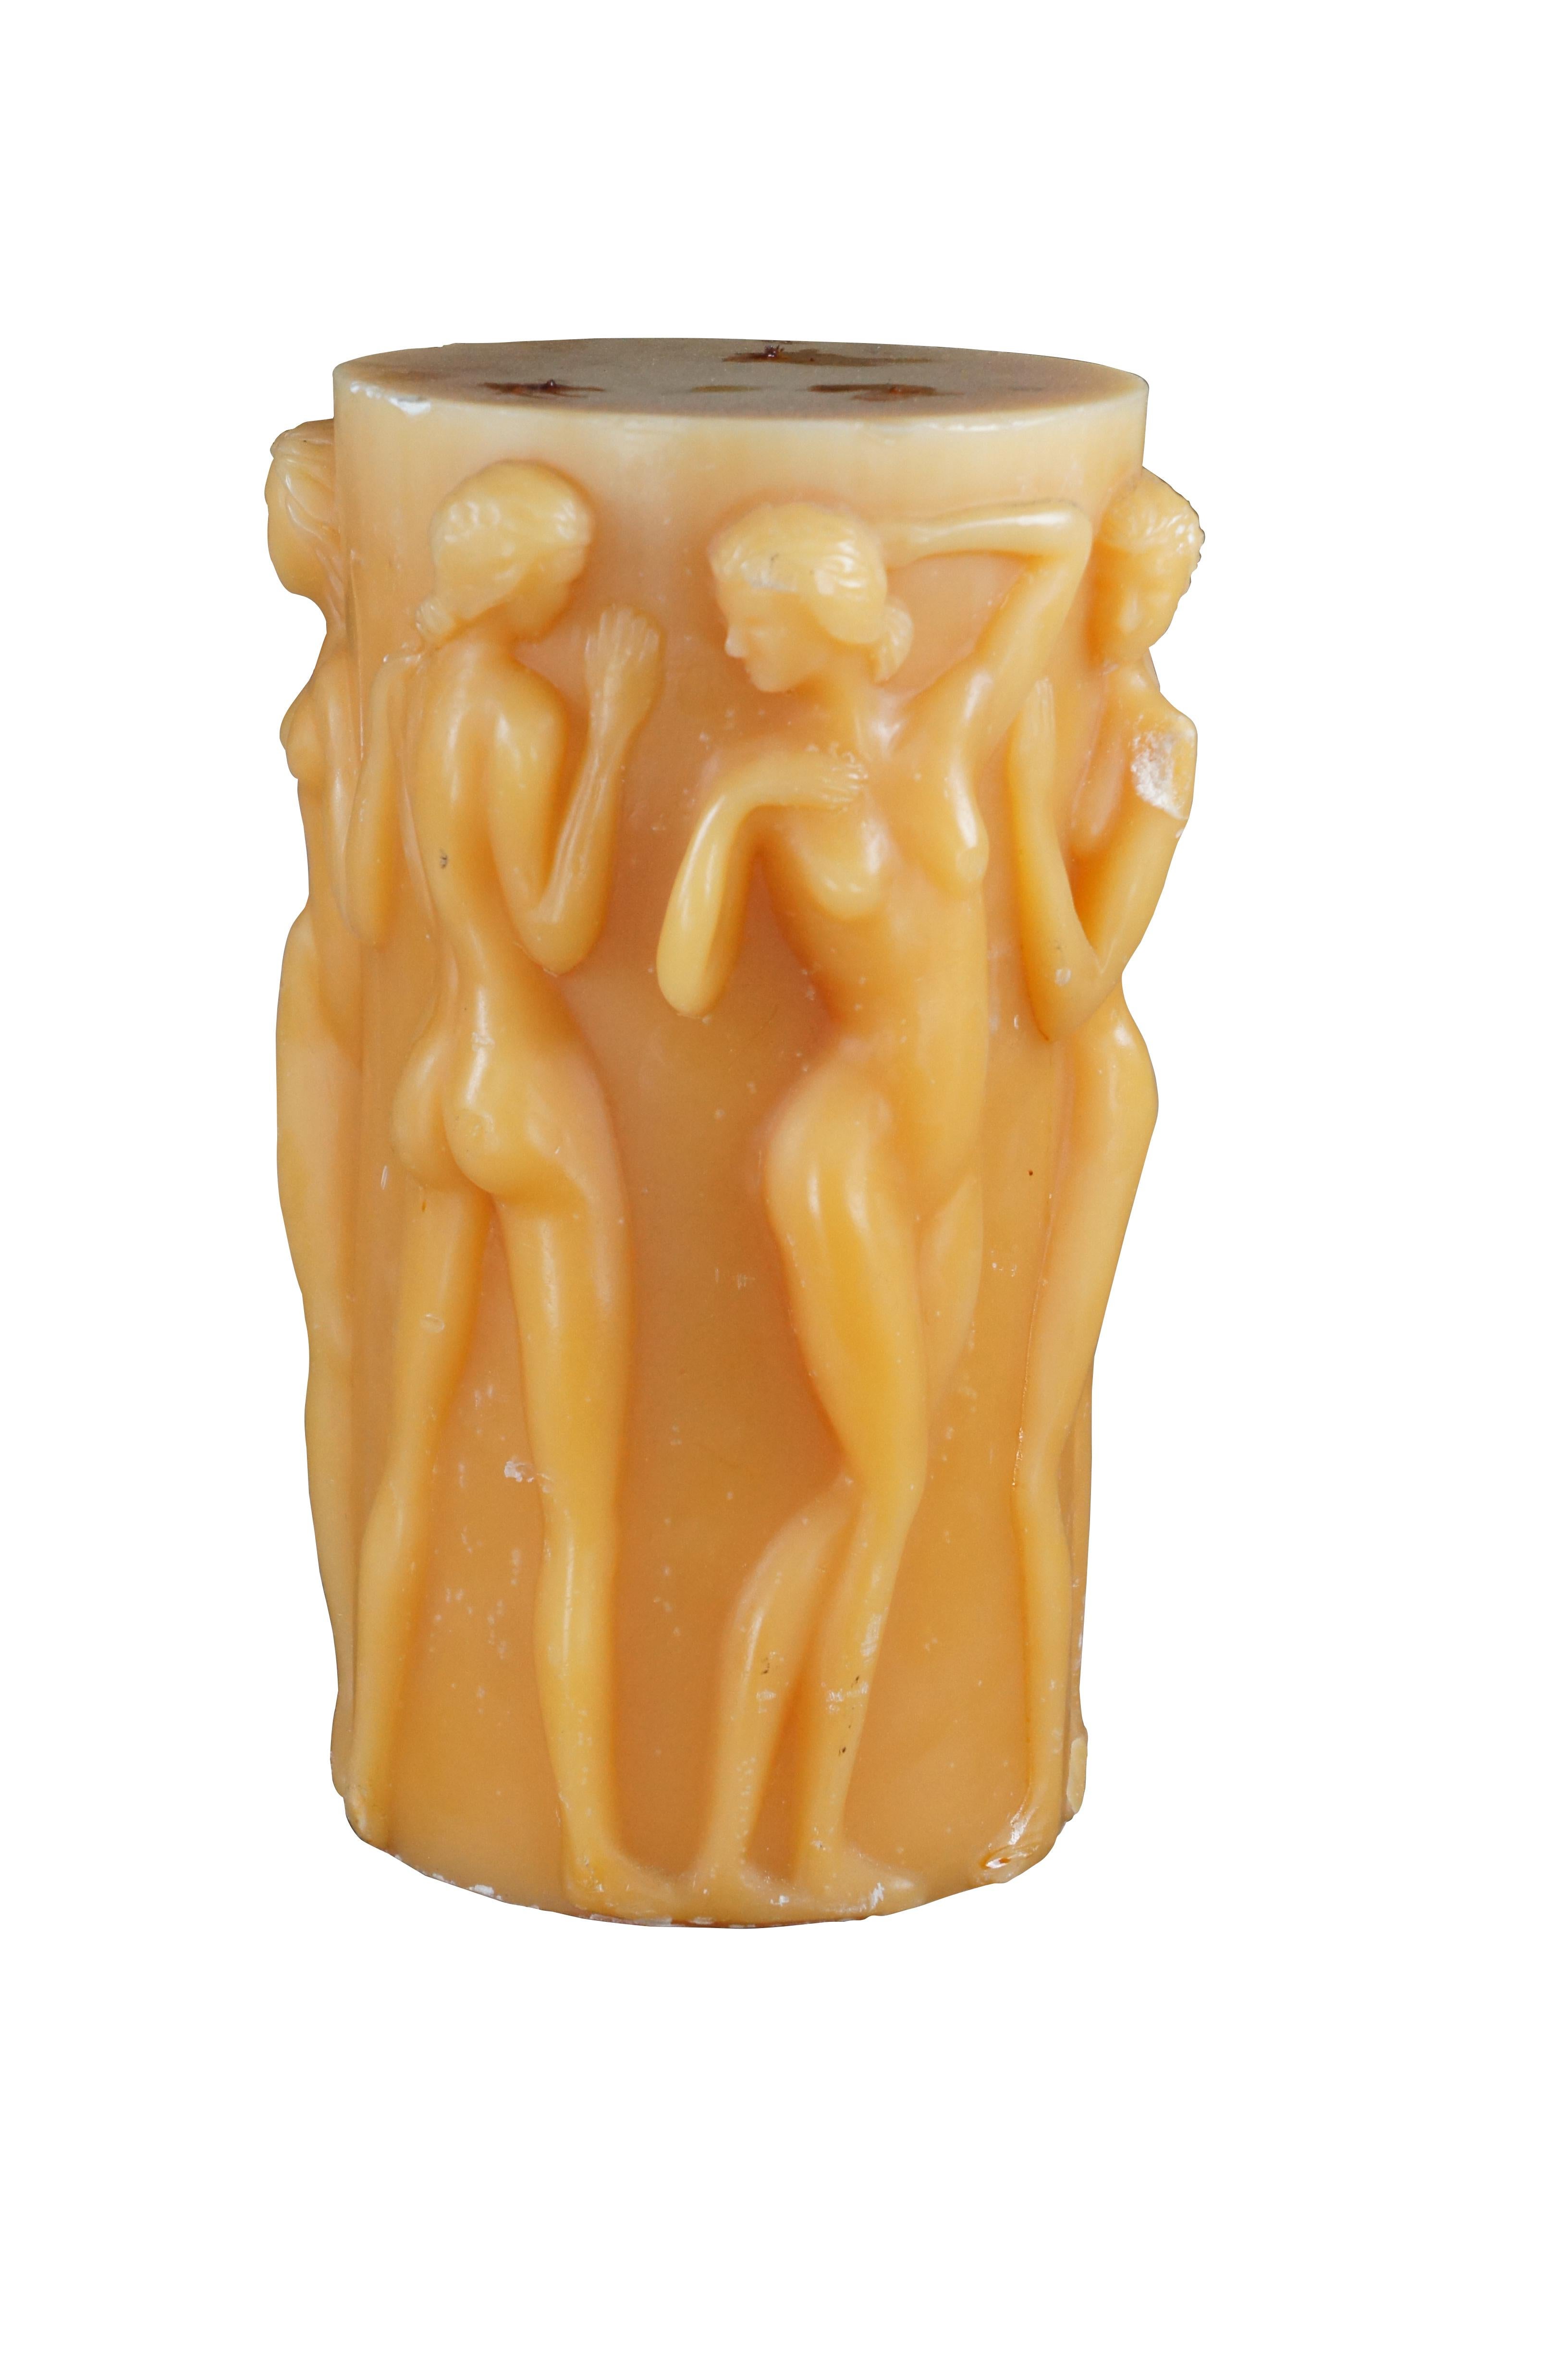 Neoclassical Intira Candle Factory Lalique 'Bacchantes' Nude Figural Large Wax Candle 15